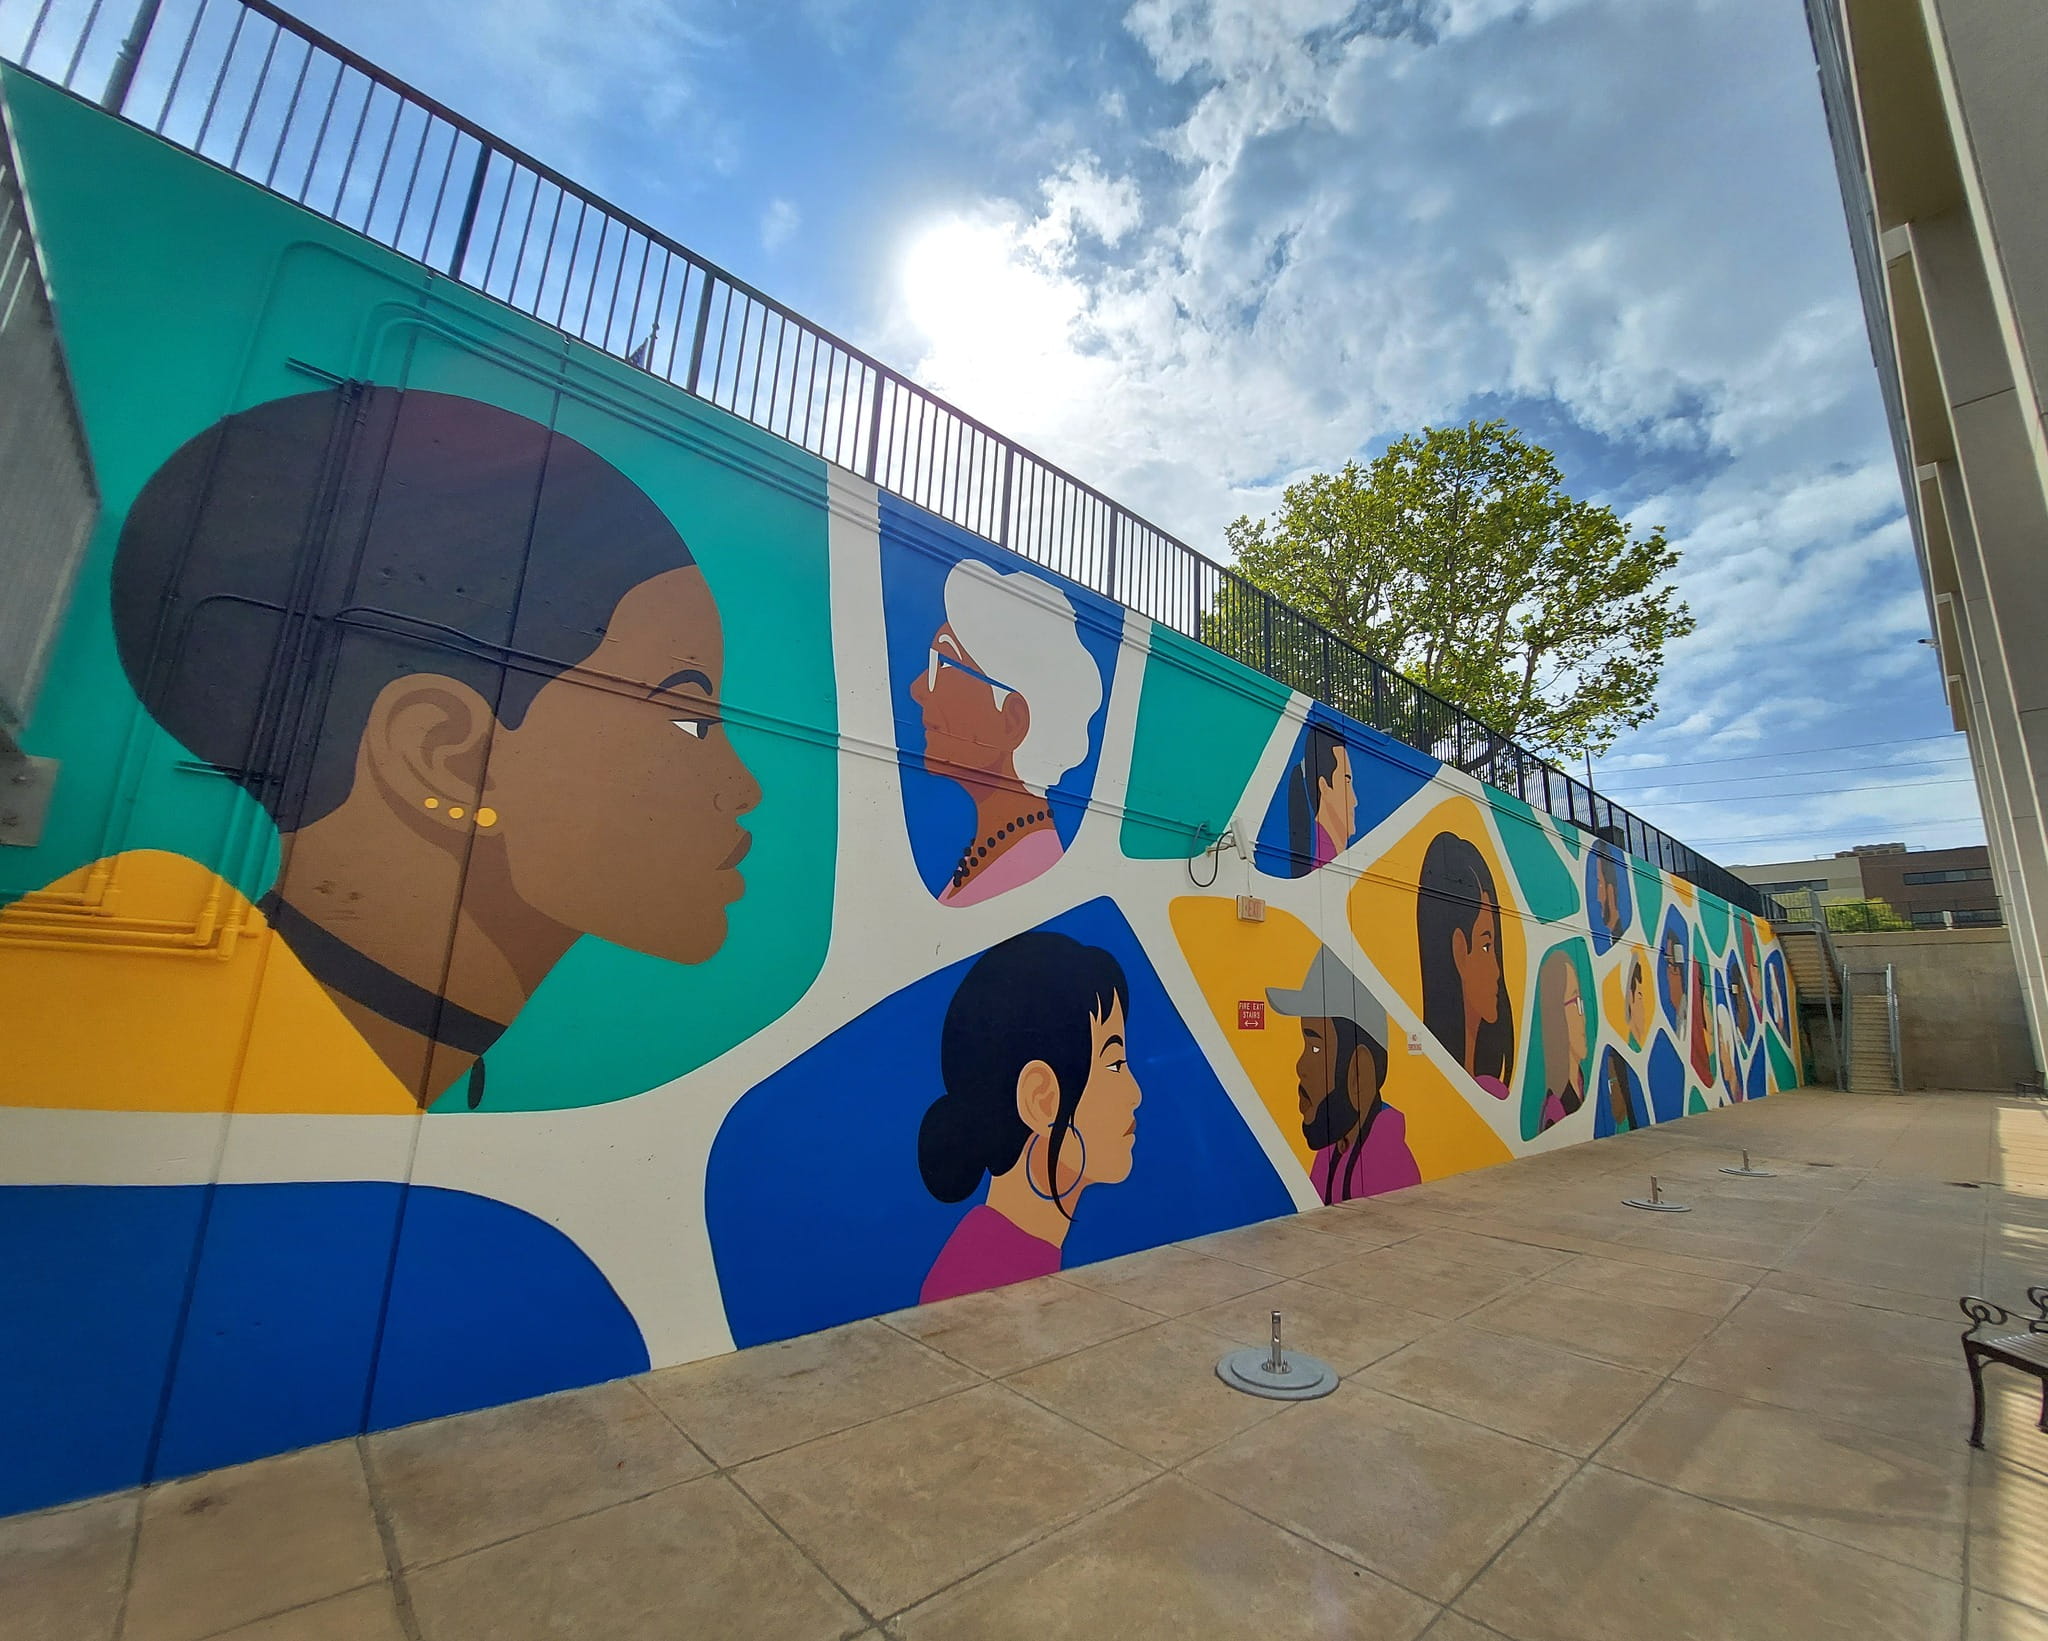 ‘I belong’: Associates reflected in faces of new mural in Ascension Kansas